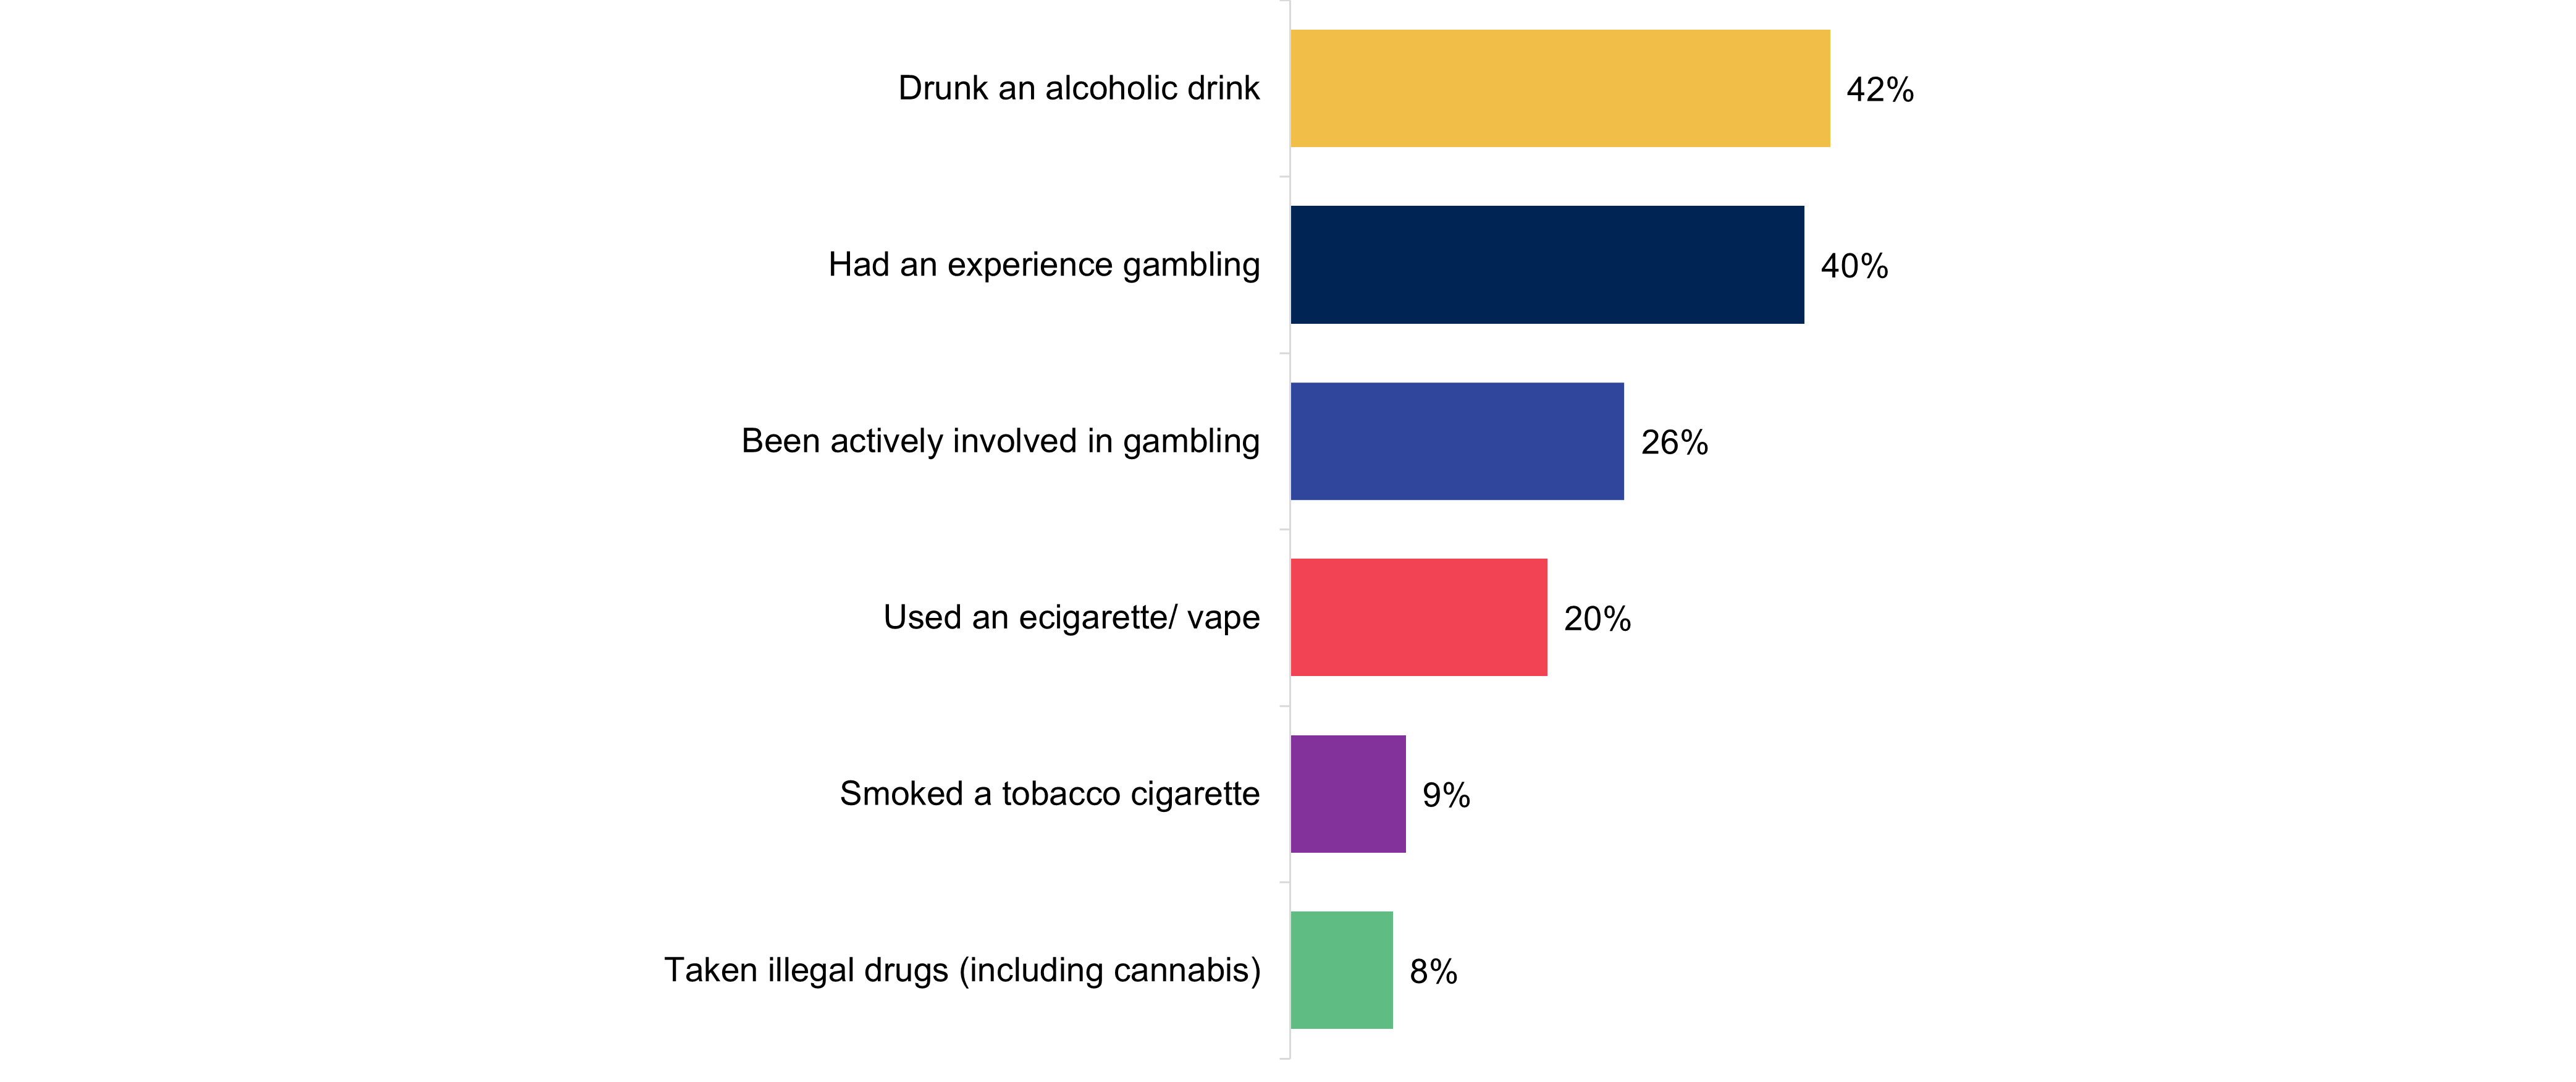 A bar chart showing participation in risk-taking behaviours in the past 12 months. Data from the chart is provided within the following table.